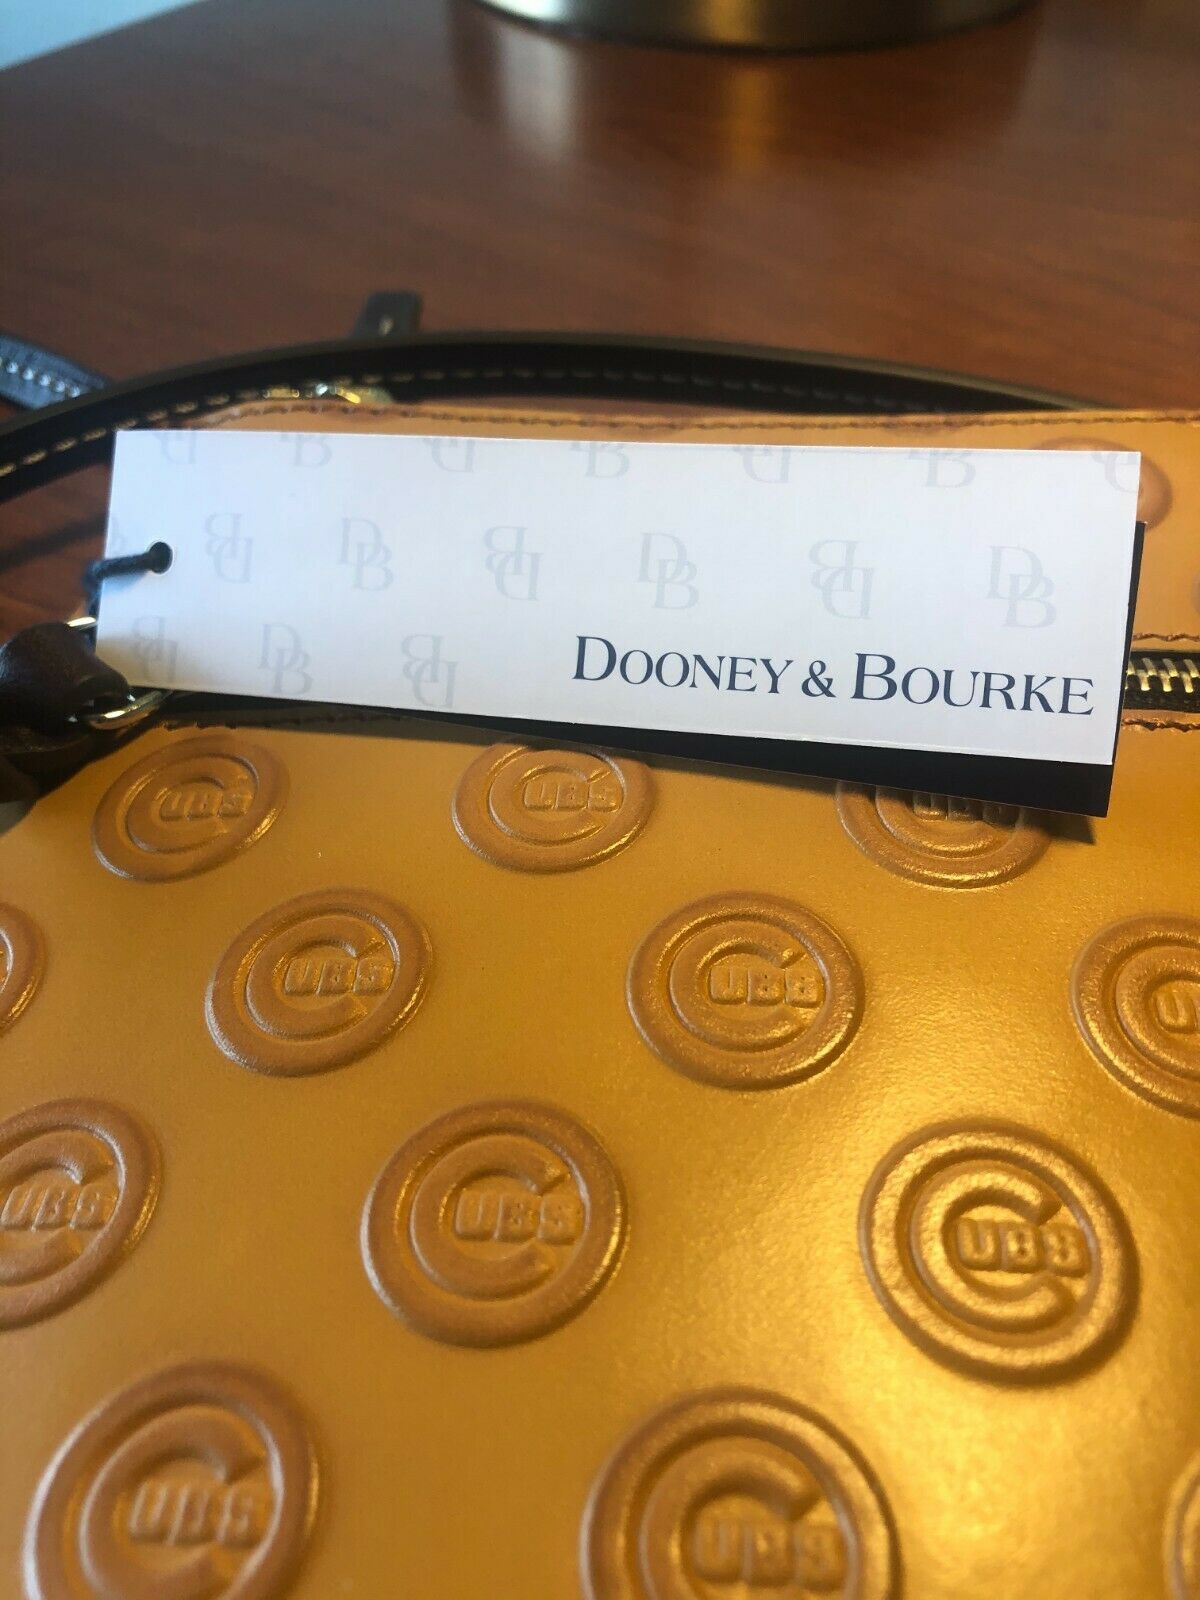 Dooney & Bourke CHICAGO CUBS Crossbody and similar items